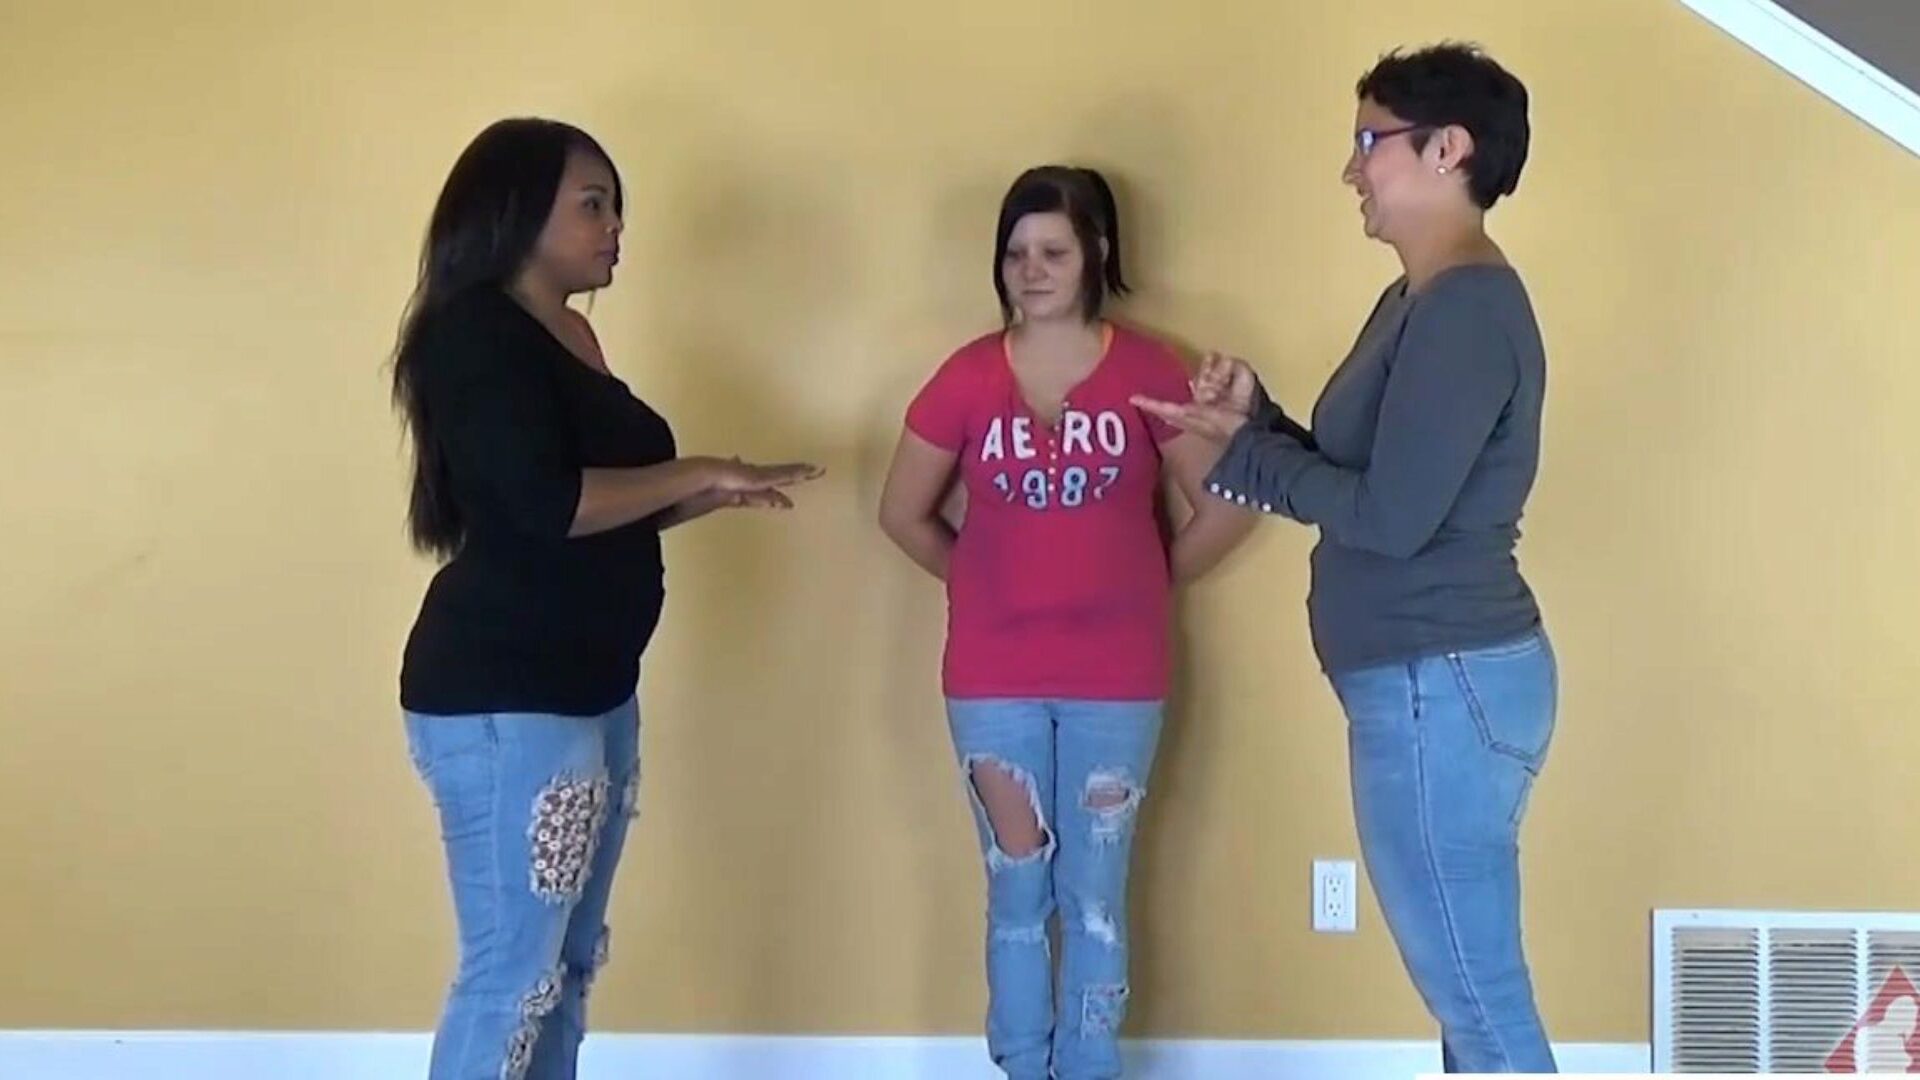 Three Chubby's Play a Strip Game of Rock Paper Scissors